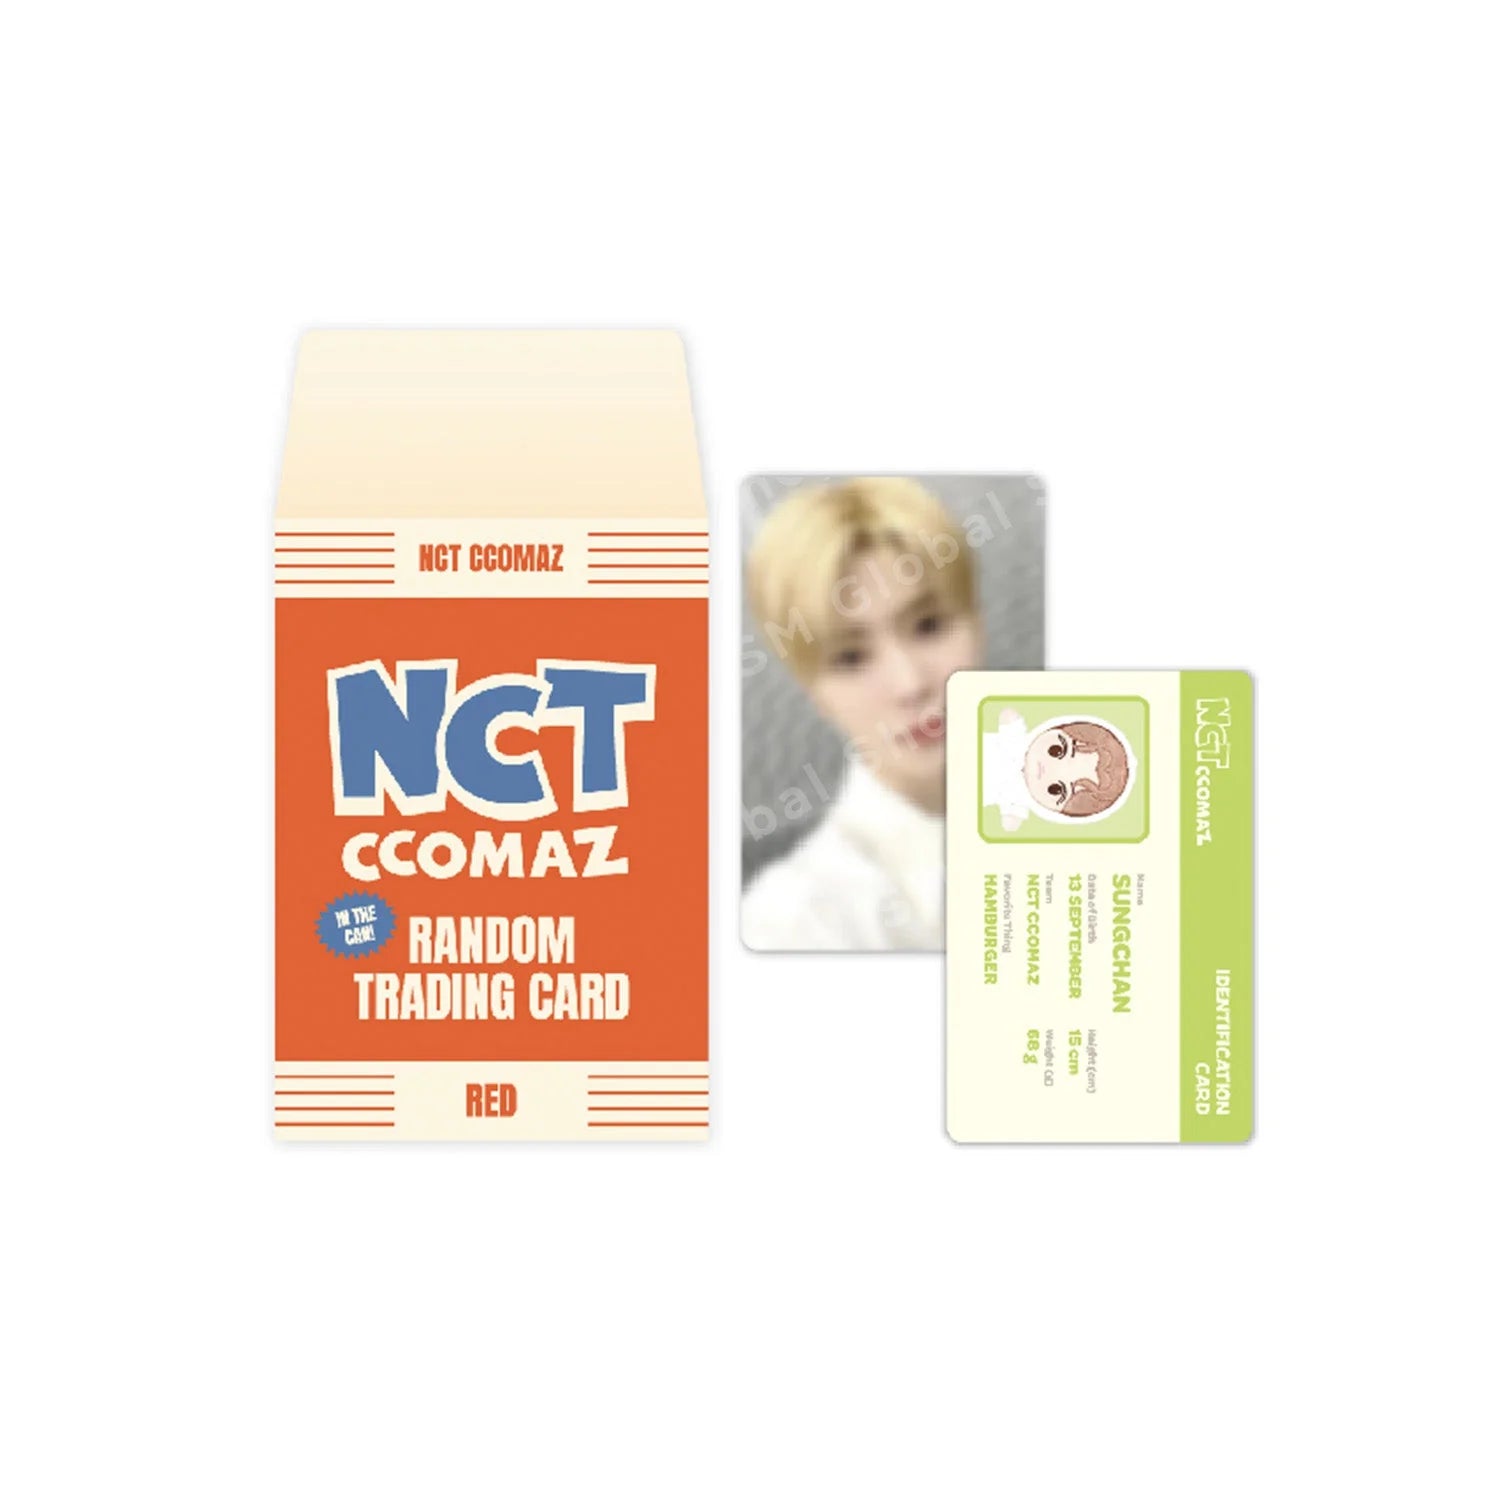 NCT CCOMAZ GROCERY STORE 2ND OFFICIAL MD - RANDOM TRADING CARD SET (RED VER.)